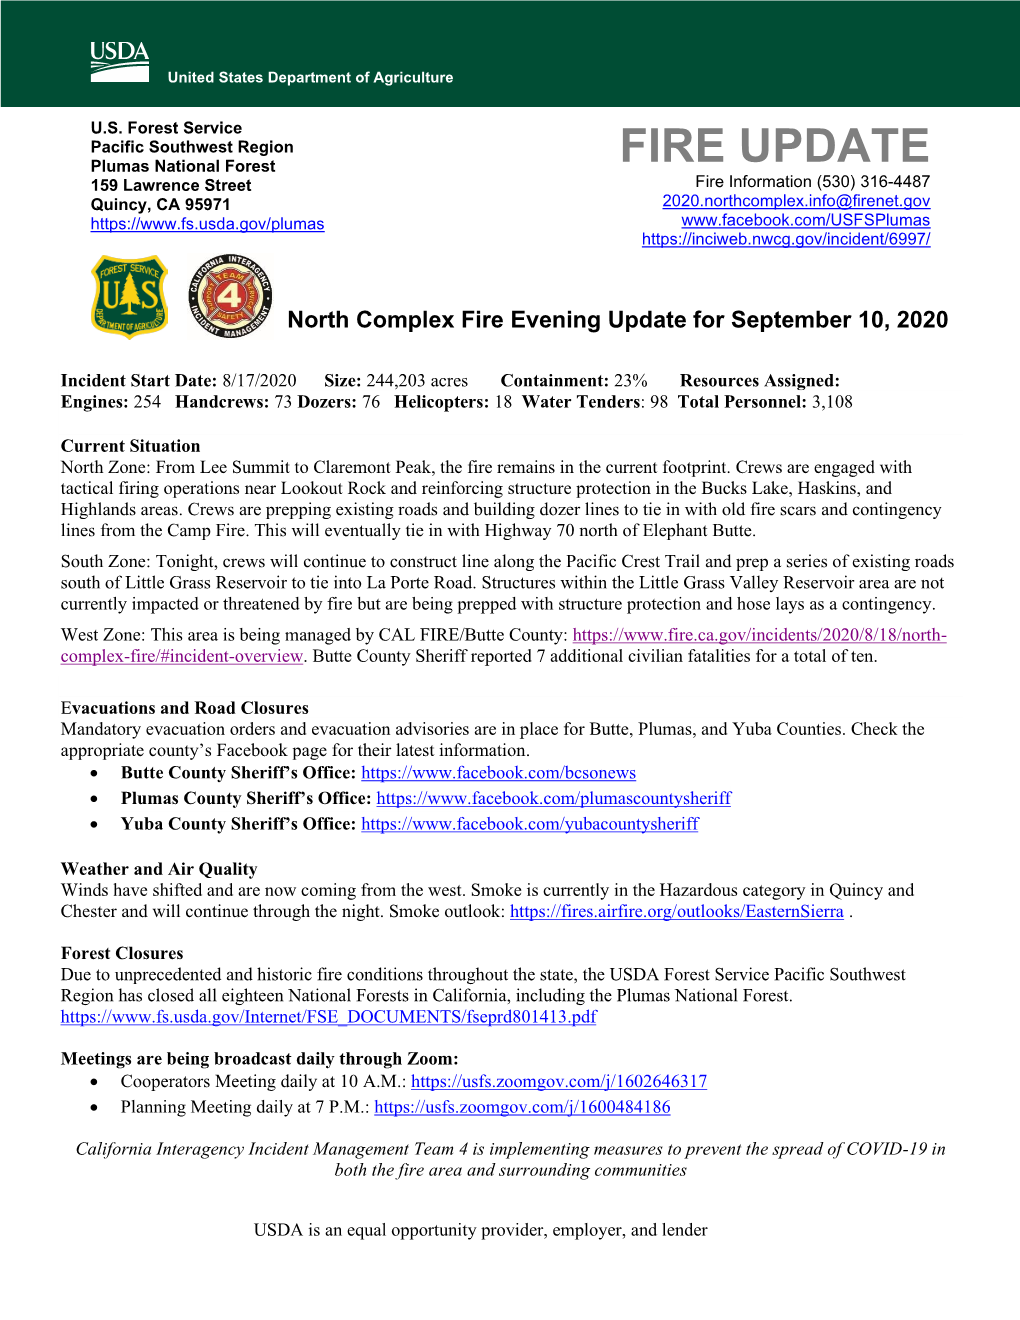 North Complex Fire Evening Update for September 10, 2020